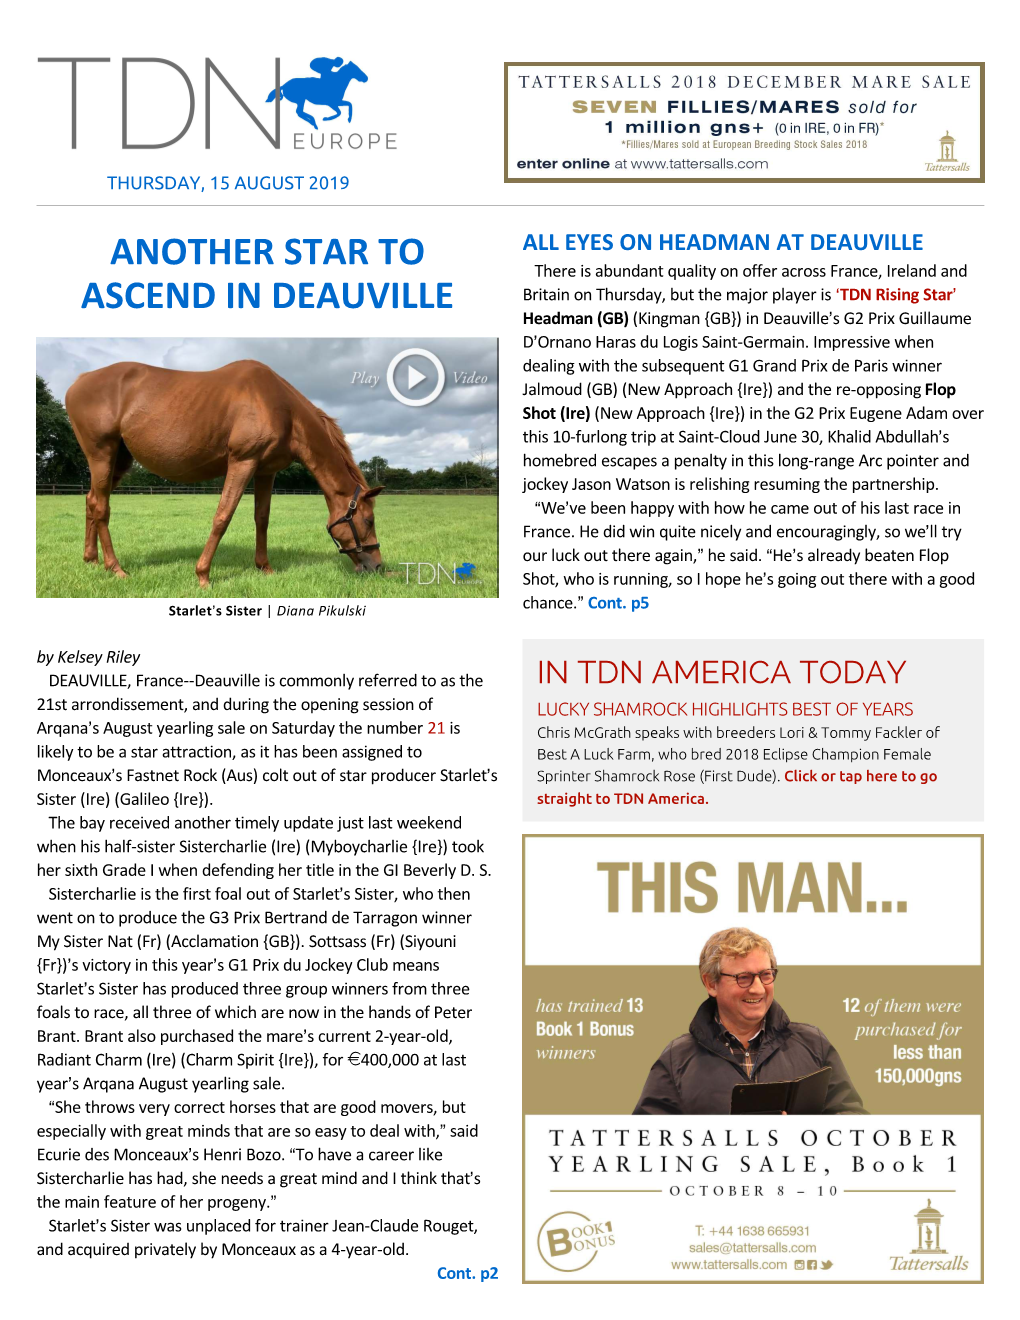 Another Star to Ascend in Deauville Cont